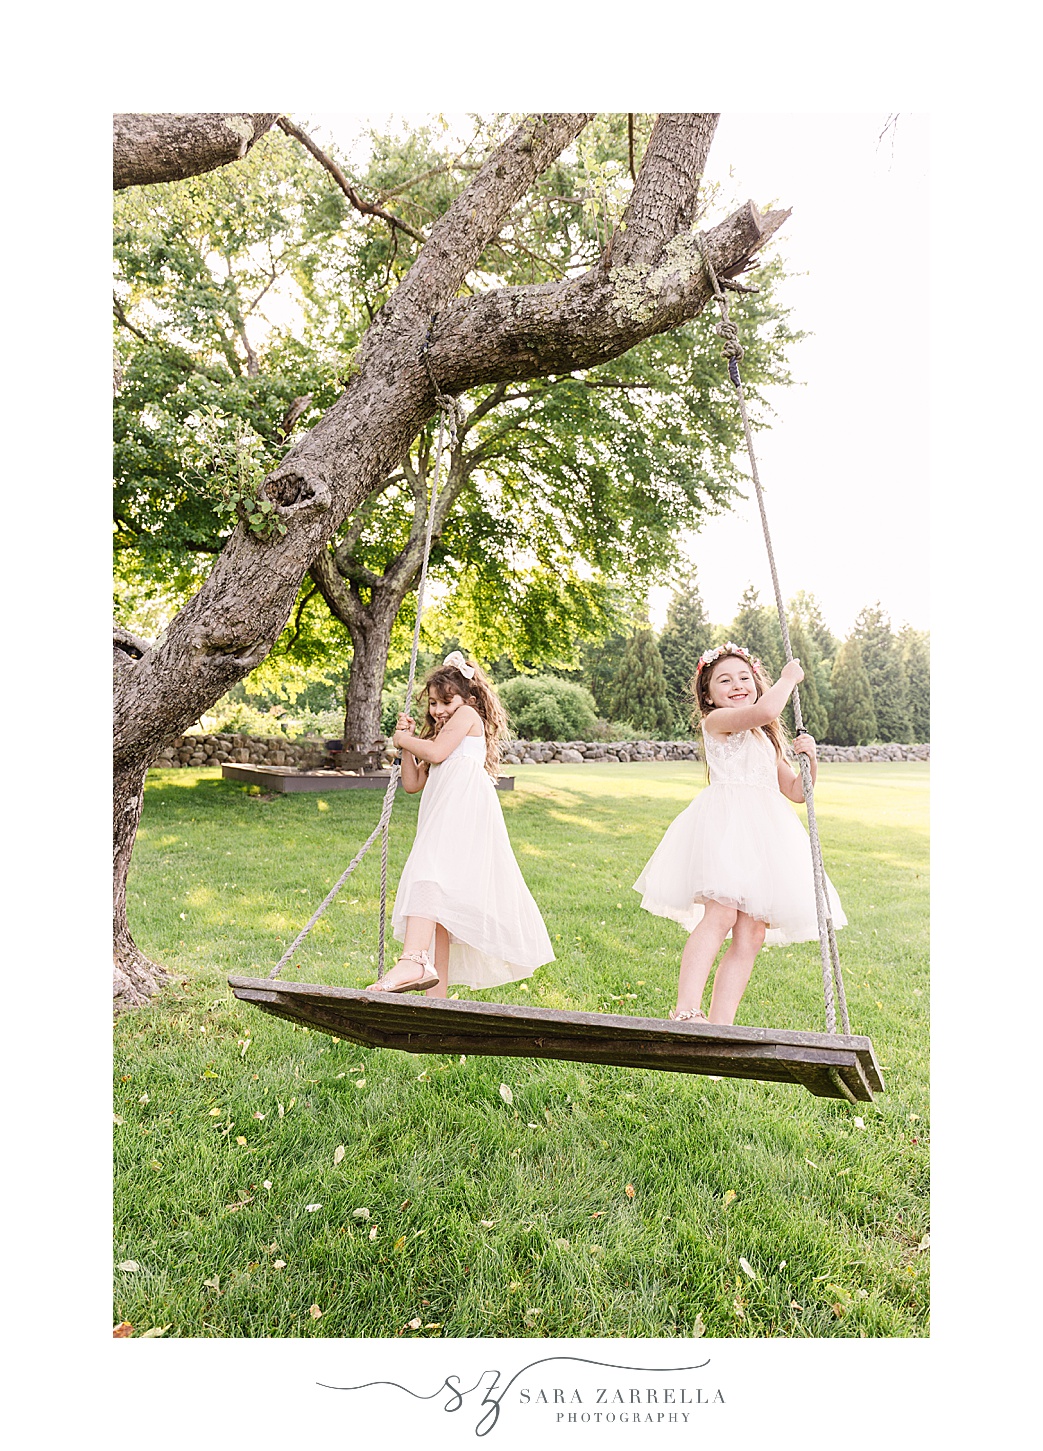 sisters swing on wooden swing during summer mini session on farm in Rhode Island